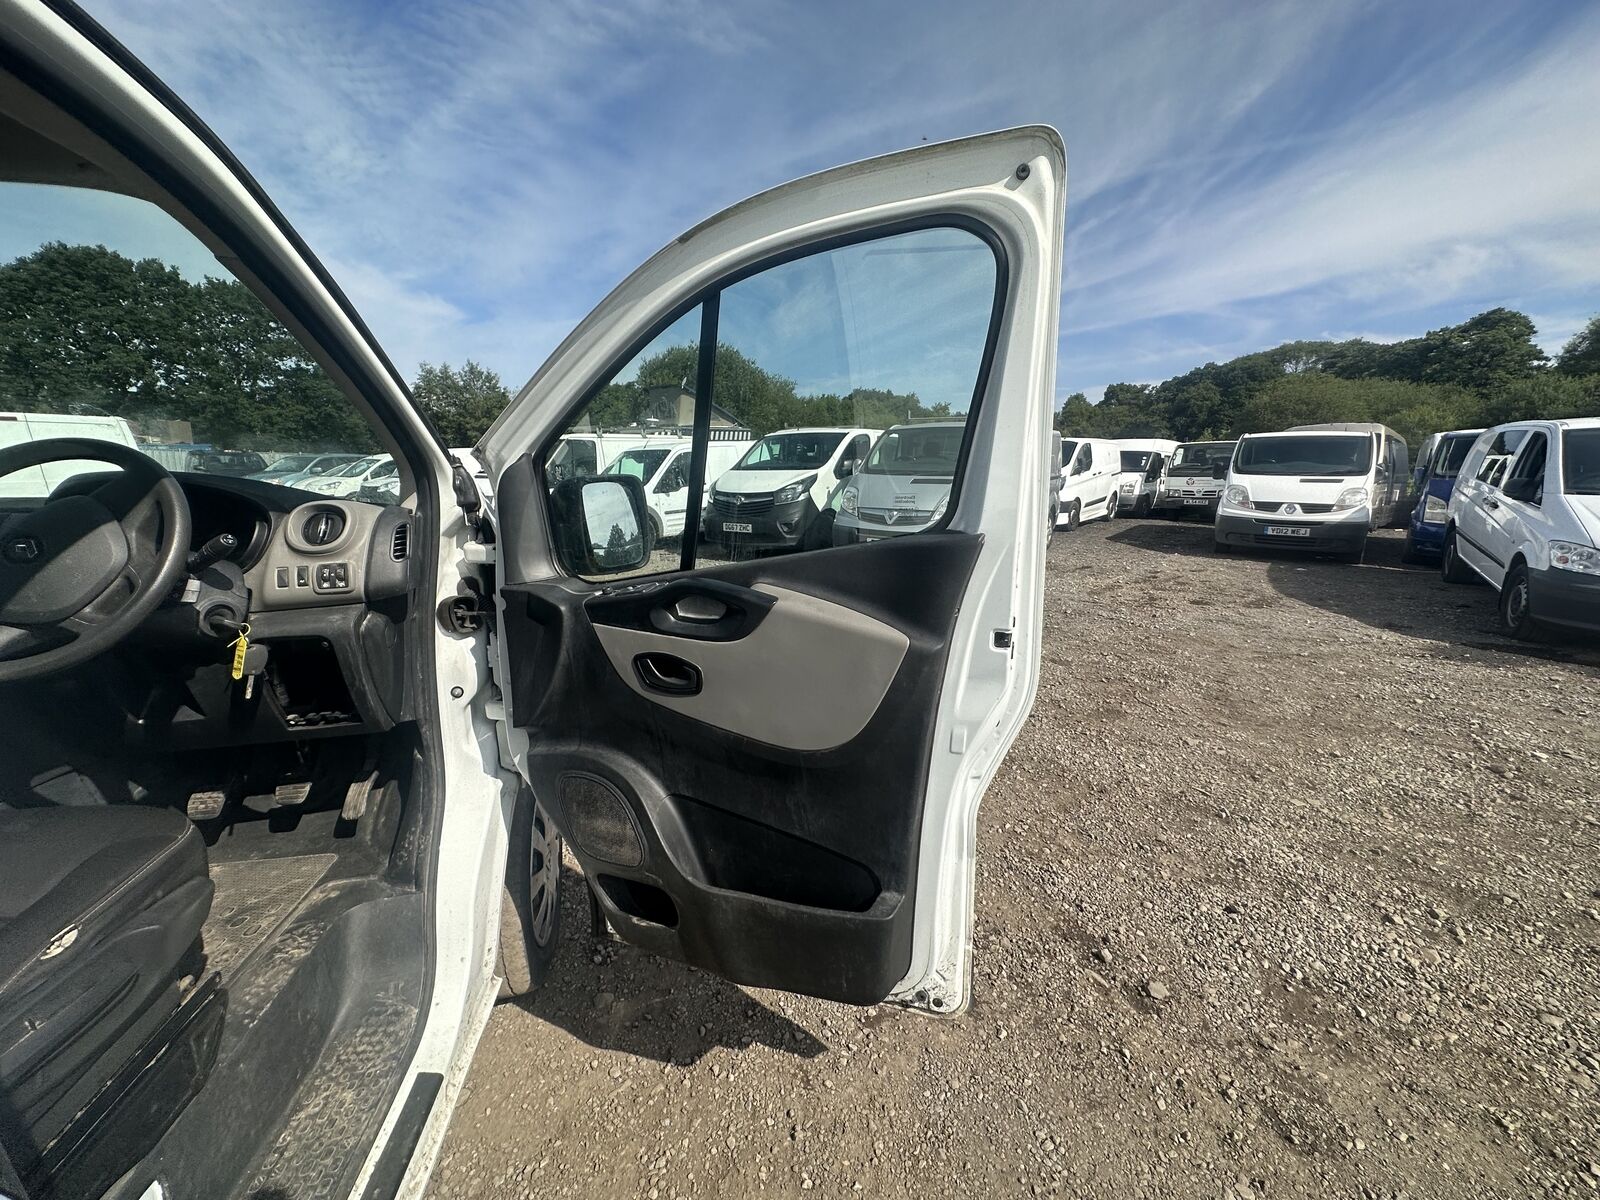 Bid on KNOCKOUT DEAL: 2018 RENAULT TRAFIC SL27 BUSINESS DIESEL VAN- Buy &amp; Sell on Auction with EAMA Group